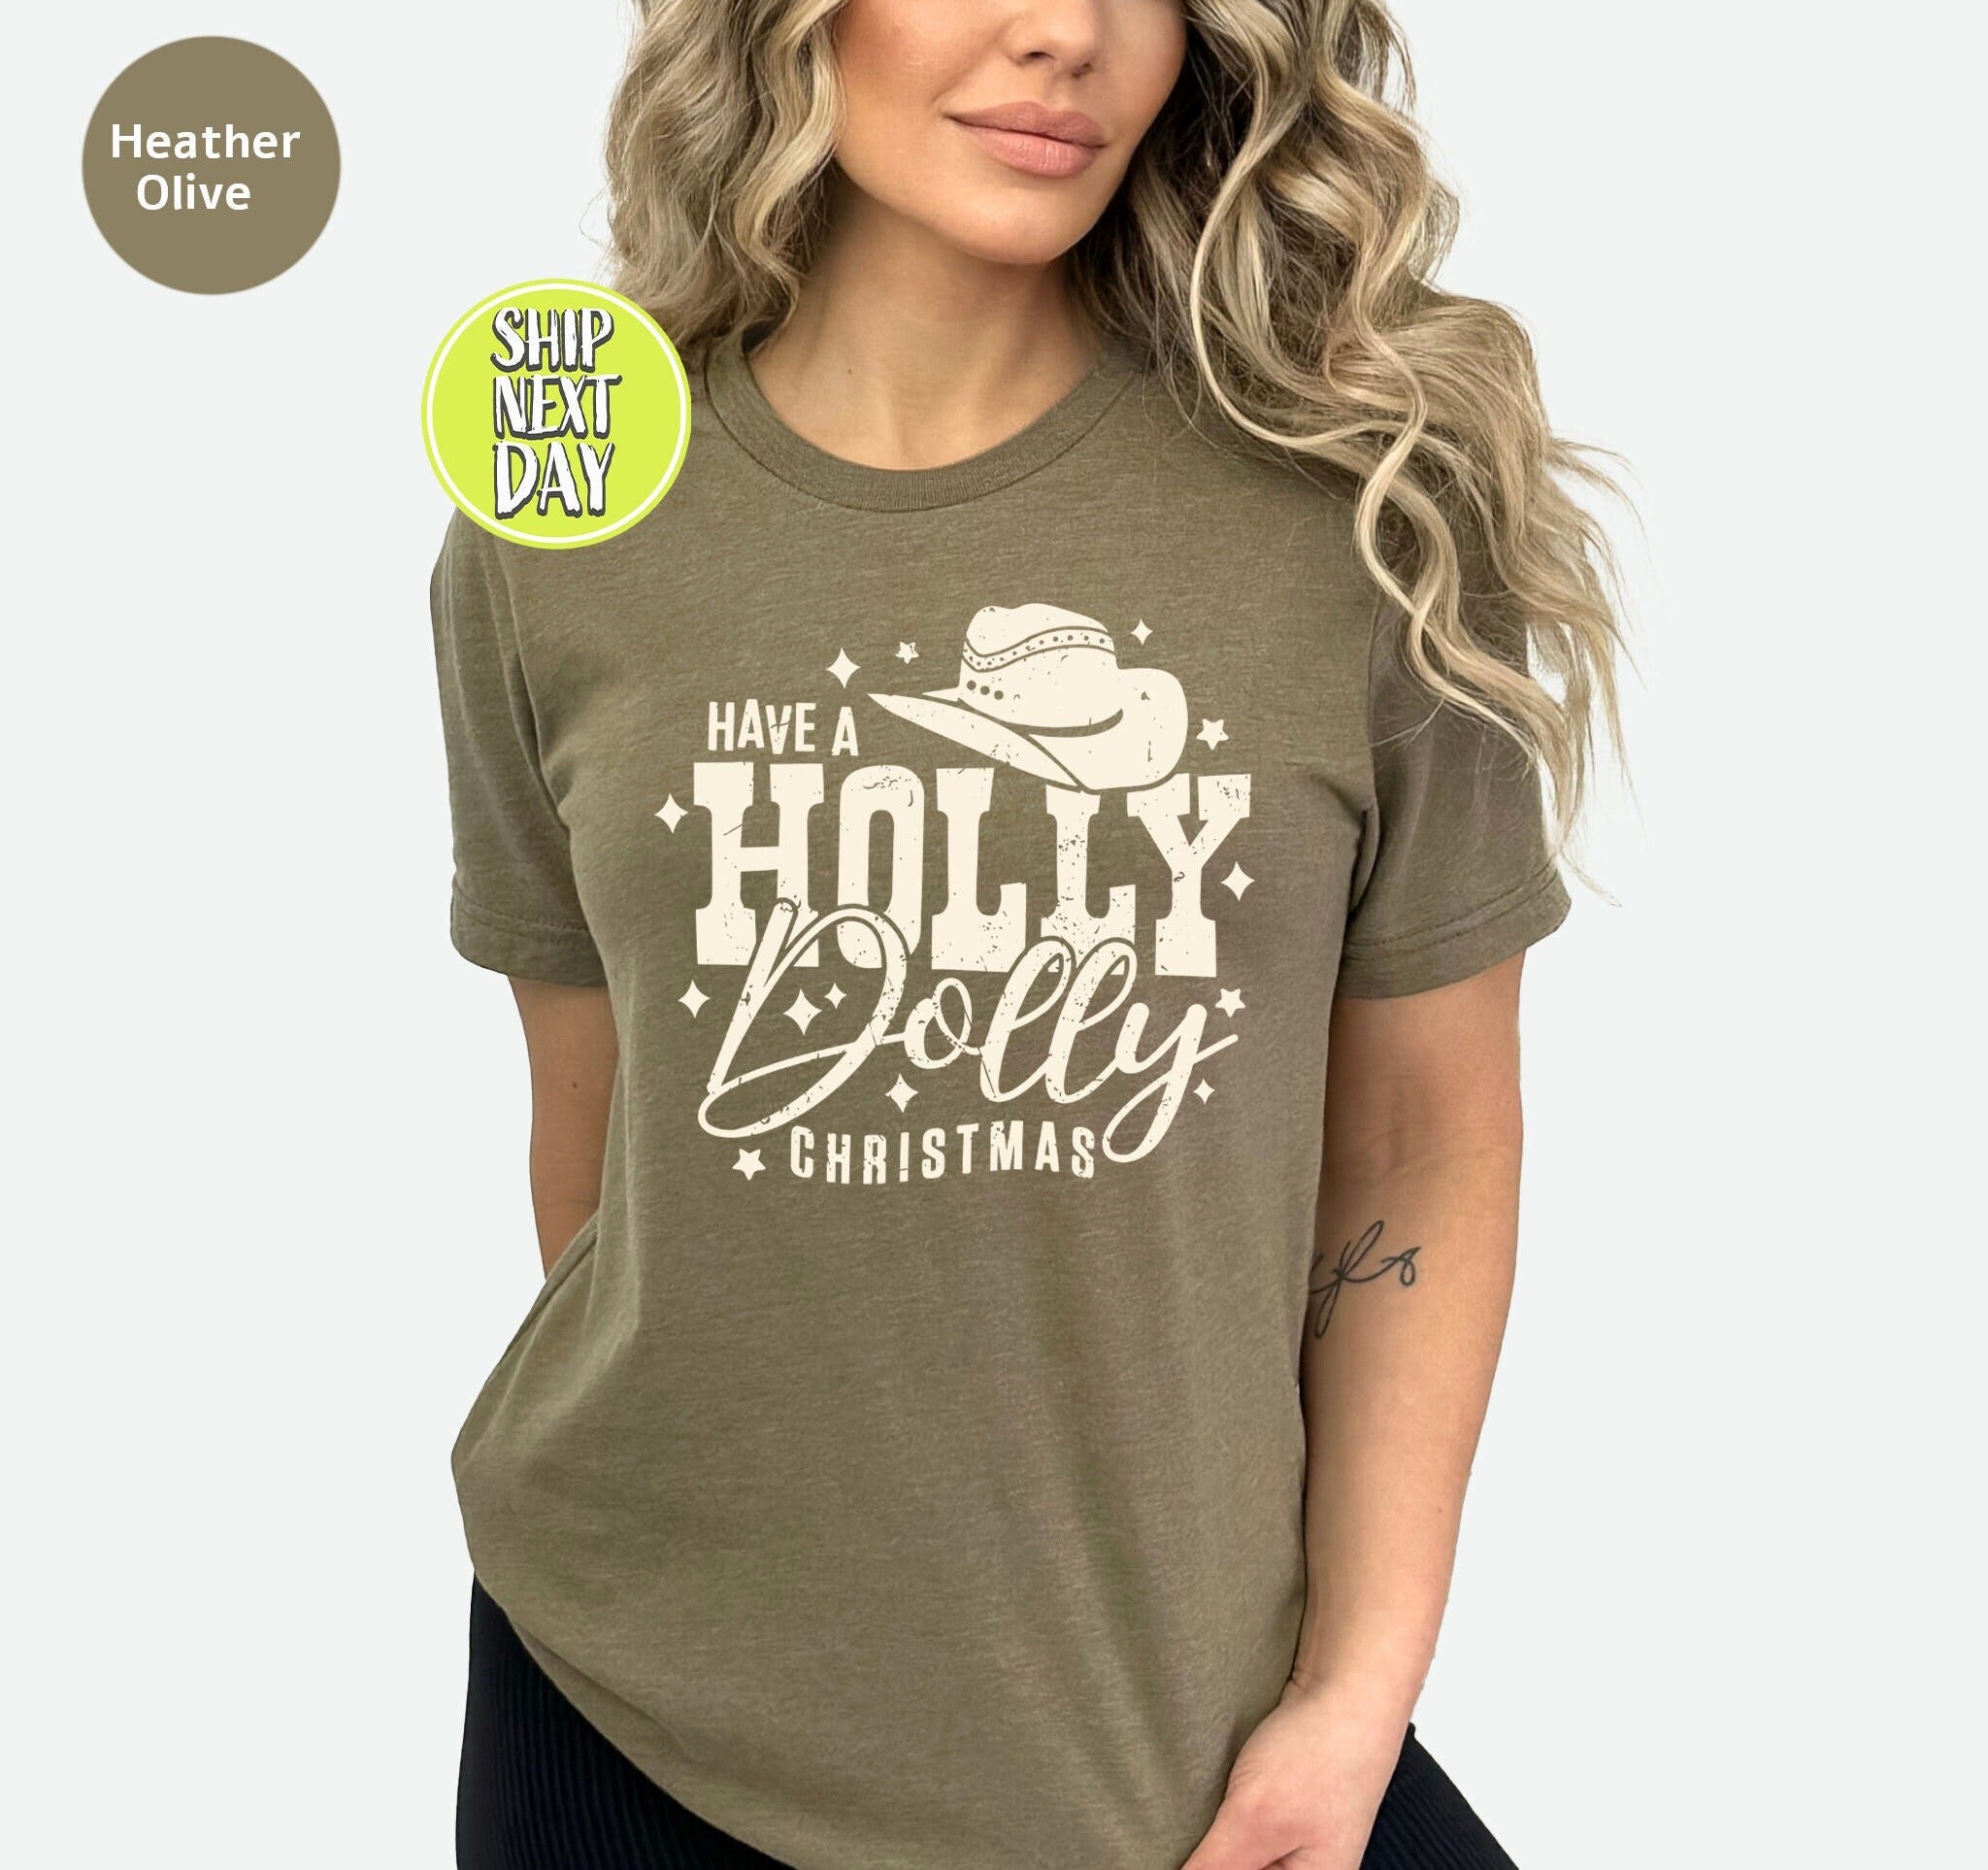 Have A Holly Dolly Christmas Shirt, Holly Dolly Christmas Tee, Vintage Christmas T-shirt, Funny Christmas Gift for women, Holidat tee -C51